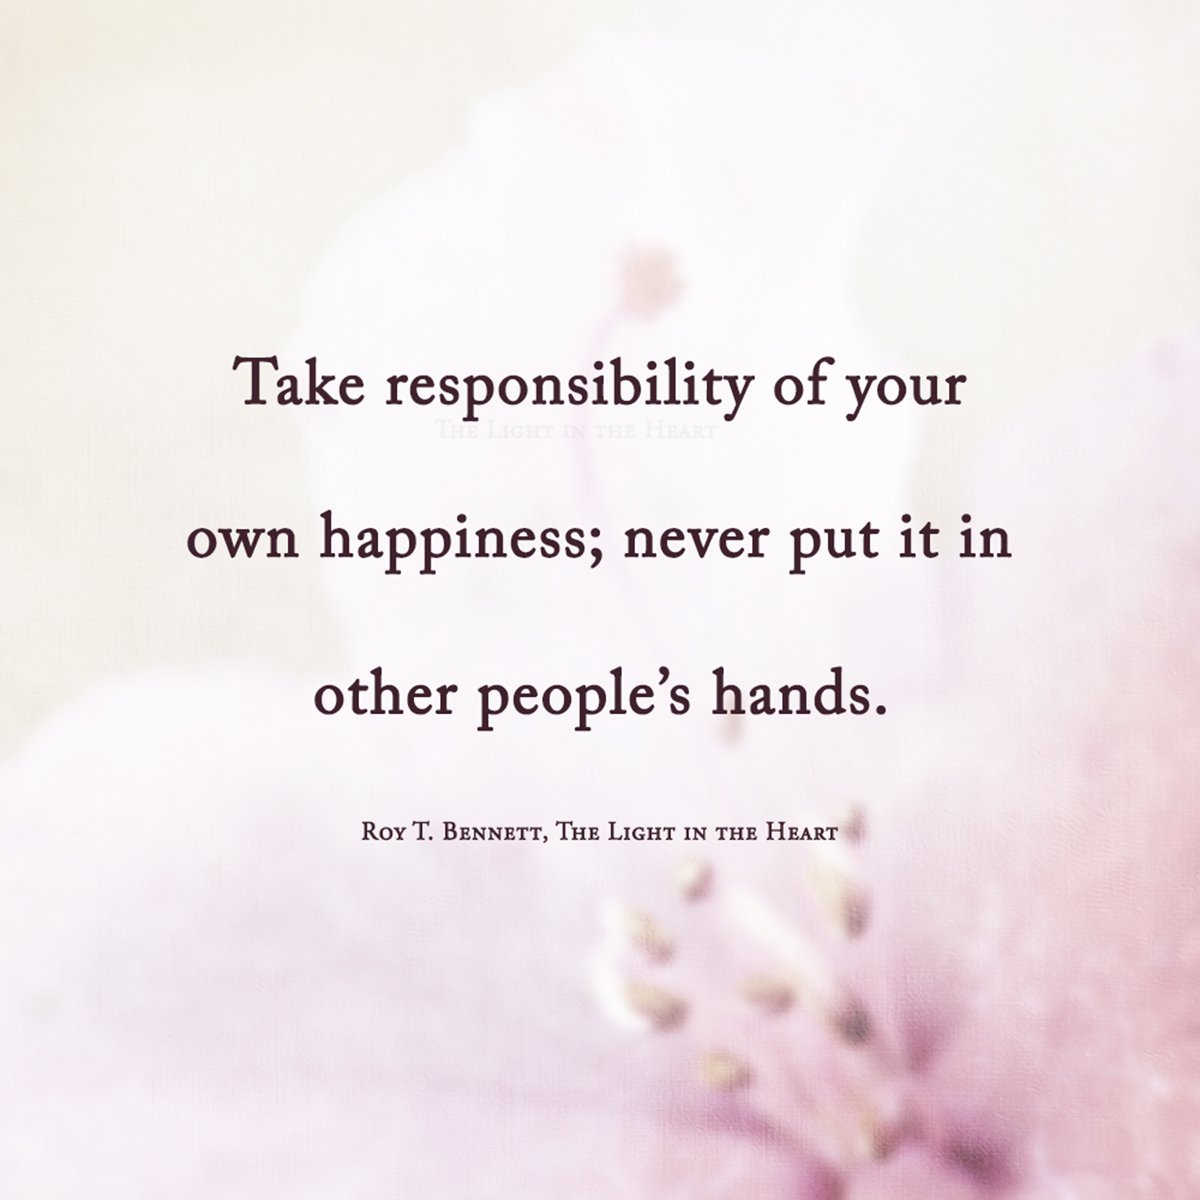 Take-responsibility-of-your-own-happiness_Roy-T-Benett_THe-Light-in-the-Heart